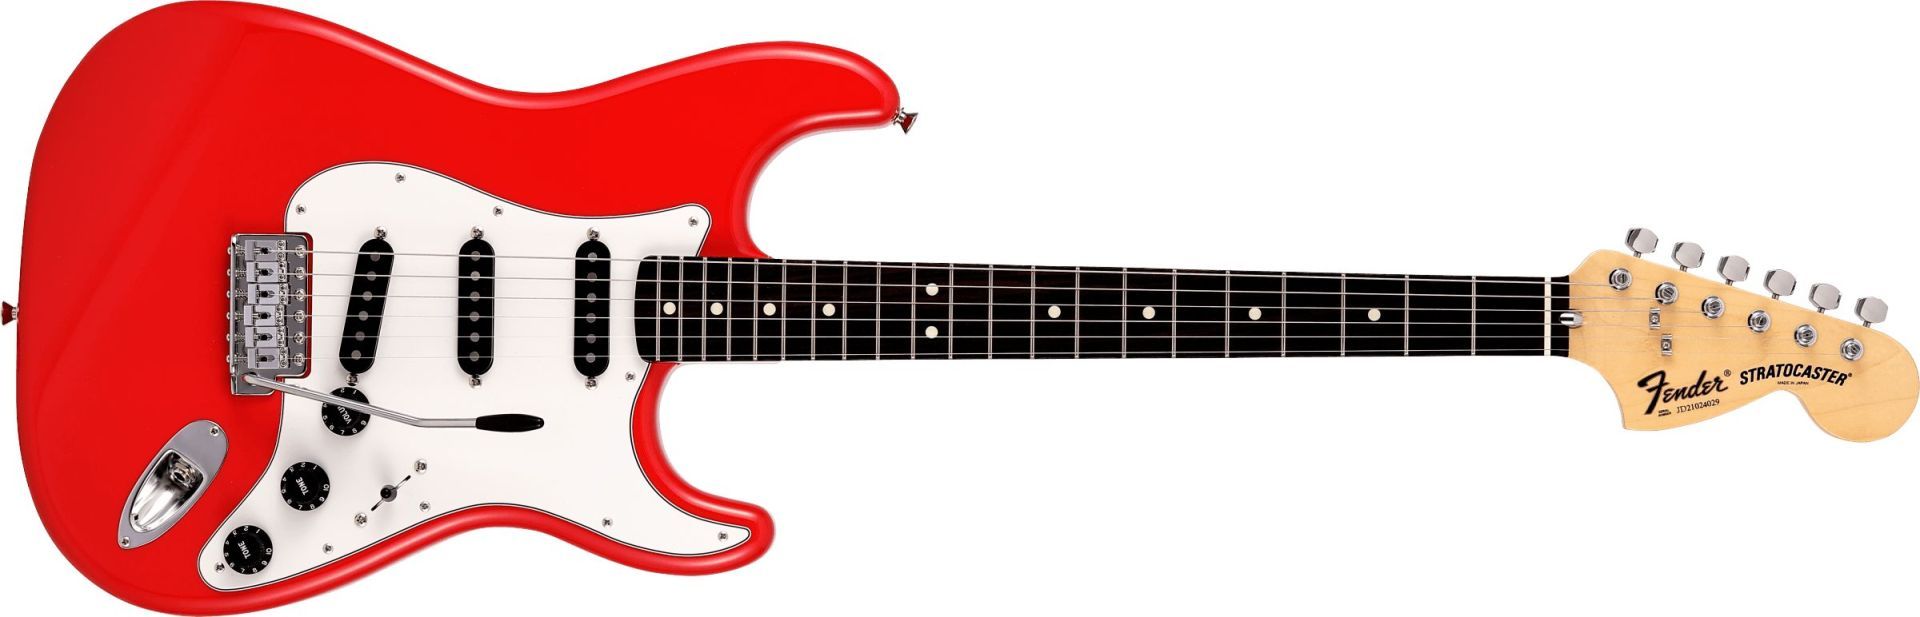 Fender Made in Japan Limited International Color Stratocaster Morocco Red